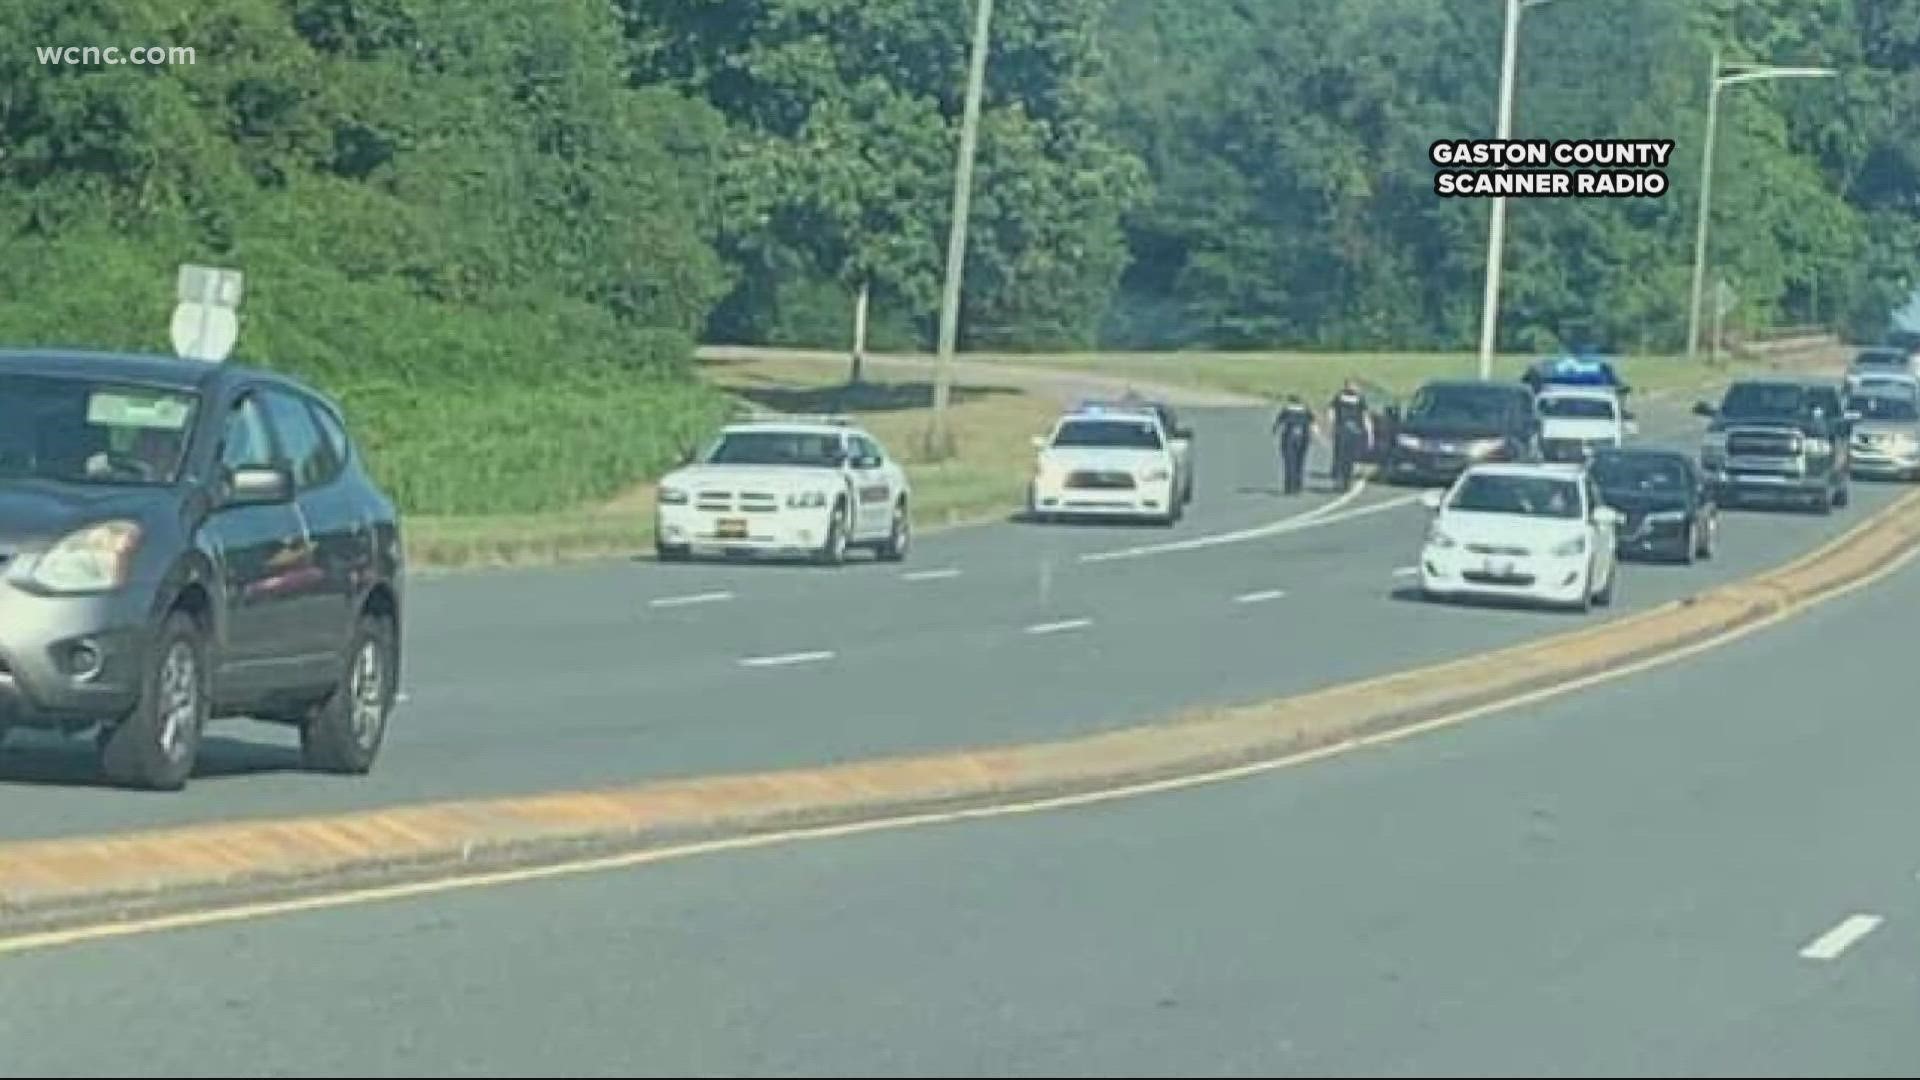 A car chase ended with three people arrested, including a child, who was driving. Mooresville Police said a new technology helped with the capture.